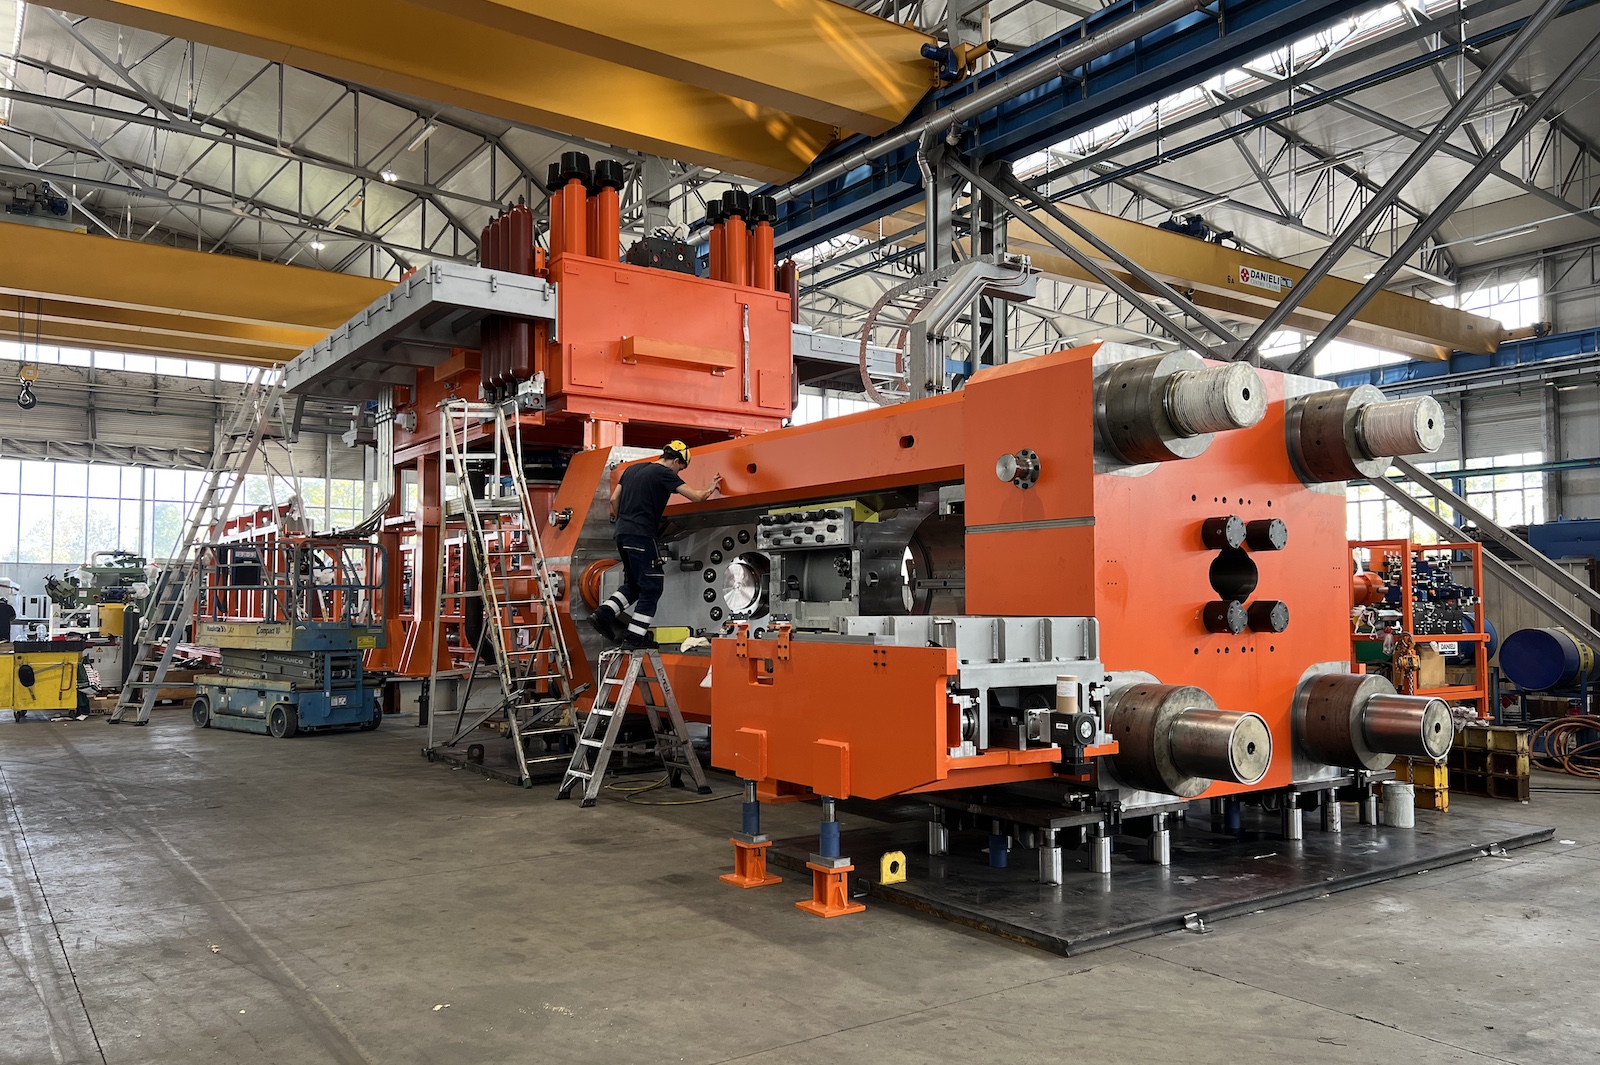 Figure 6. Jimi, the new extrusion press, as it was being constructed at the Danieli Breda plant in Italy.